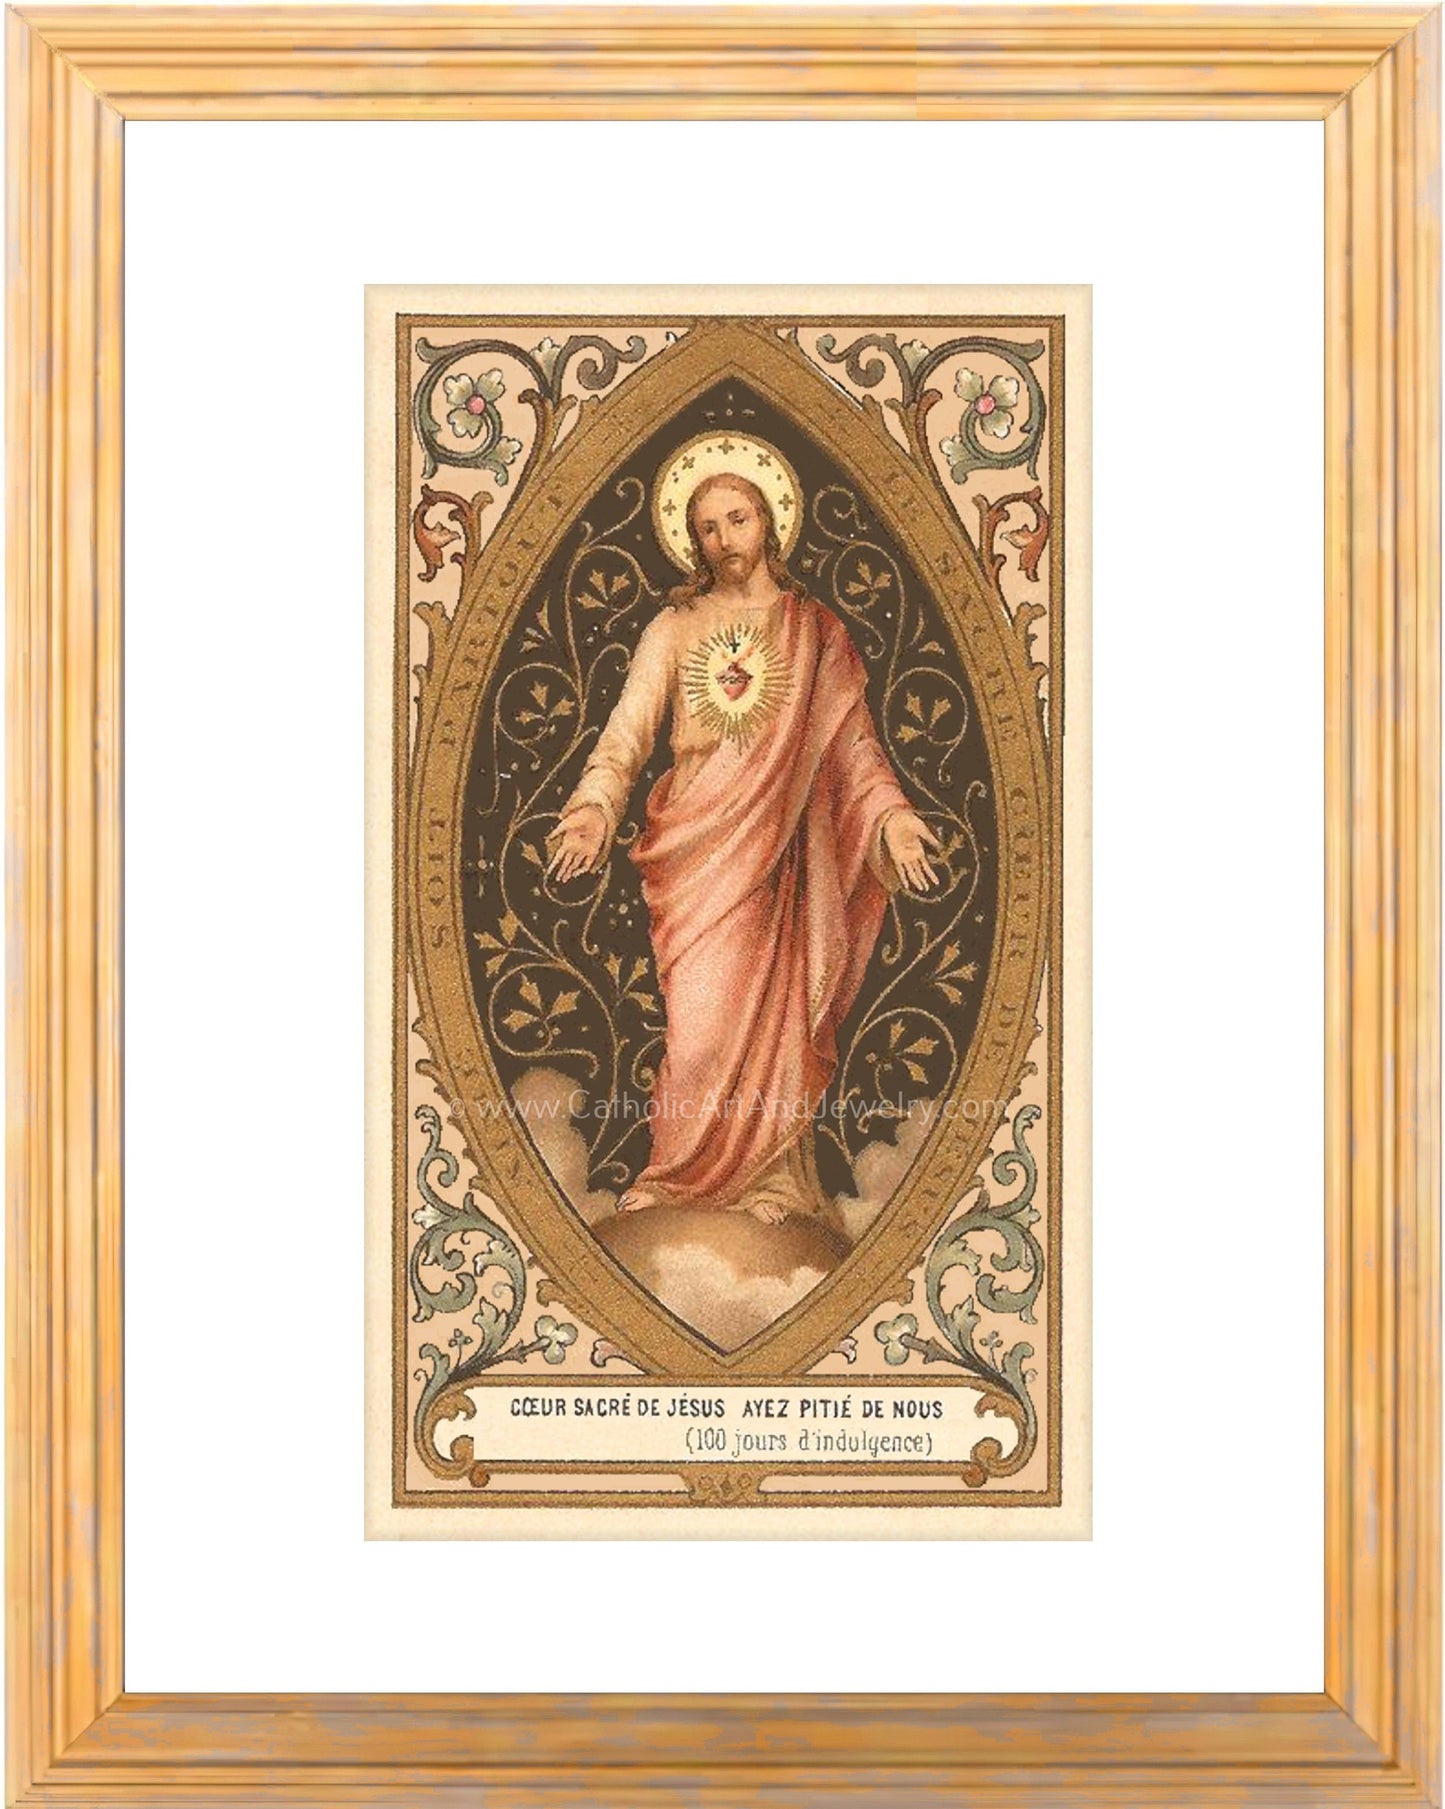 Sacred Heart of Jesus – based on a Vintage French Holy Card – Catholic Art Print – Archival Quality